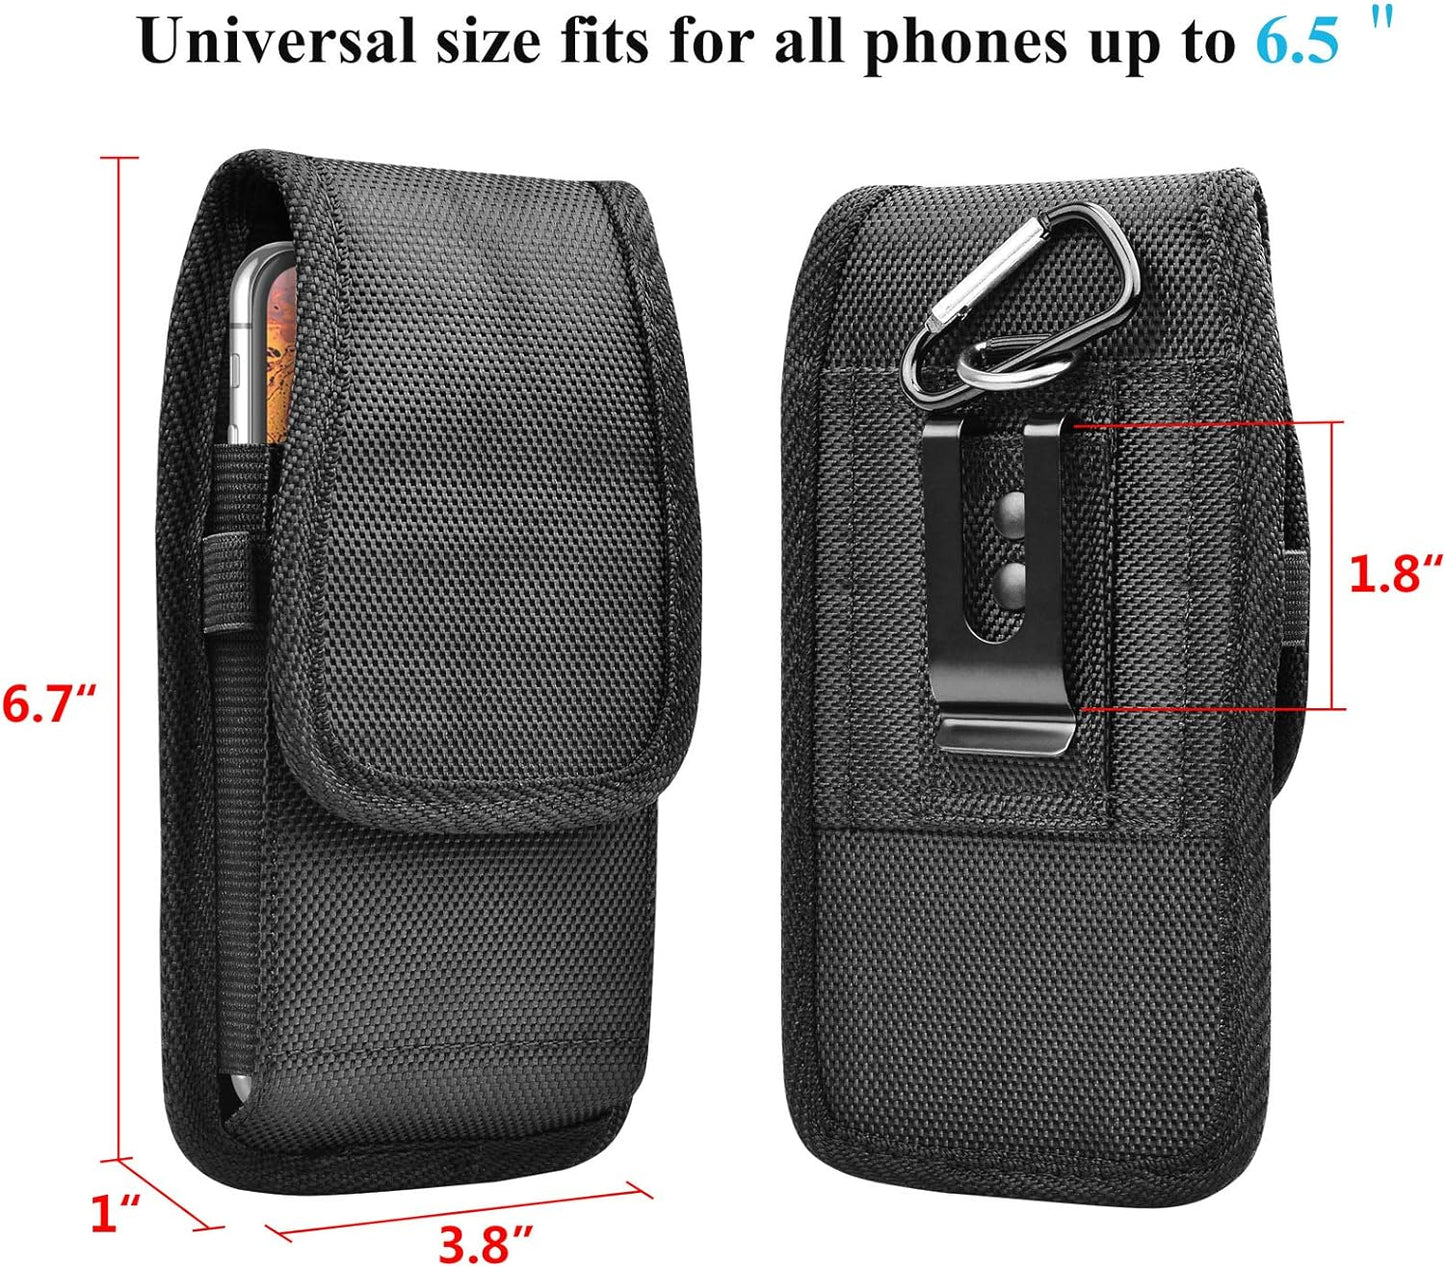 Cell Phone Holster for Iphone 13 14 Pro Max 12 11 XR 7 8 Samsung Galaxy S22 Ultra S21 S20 S10 S9 Note 20 10 A11 A21 A51 A71 A02S A12 A13 A32 A42 A52 Belt Clip Holster Phone Pouch Carrying Holder